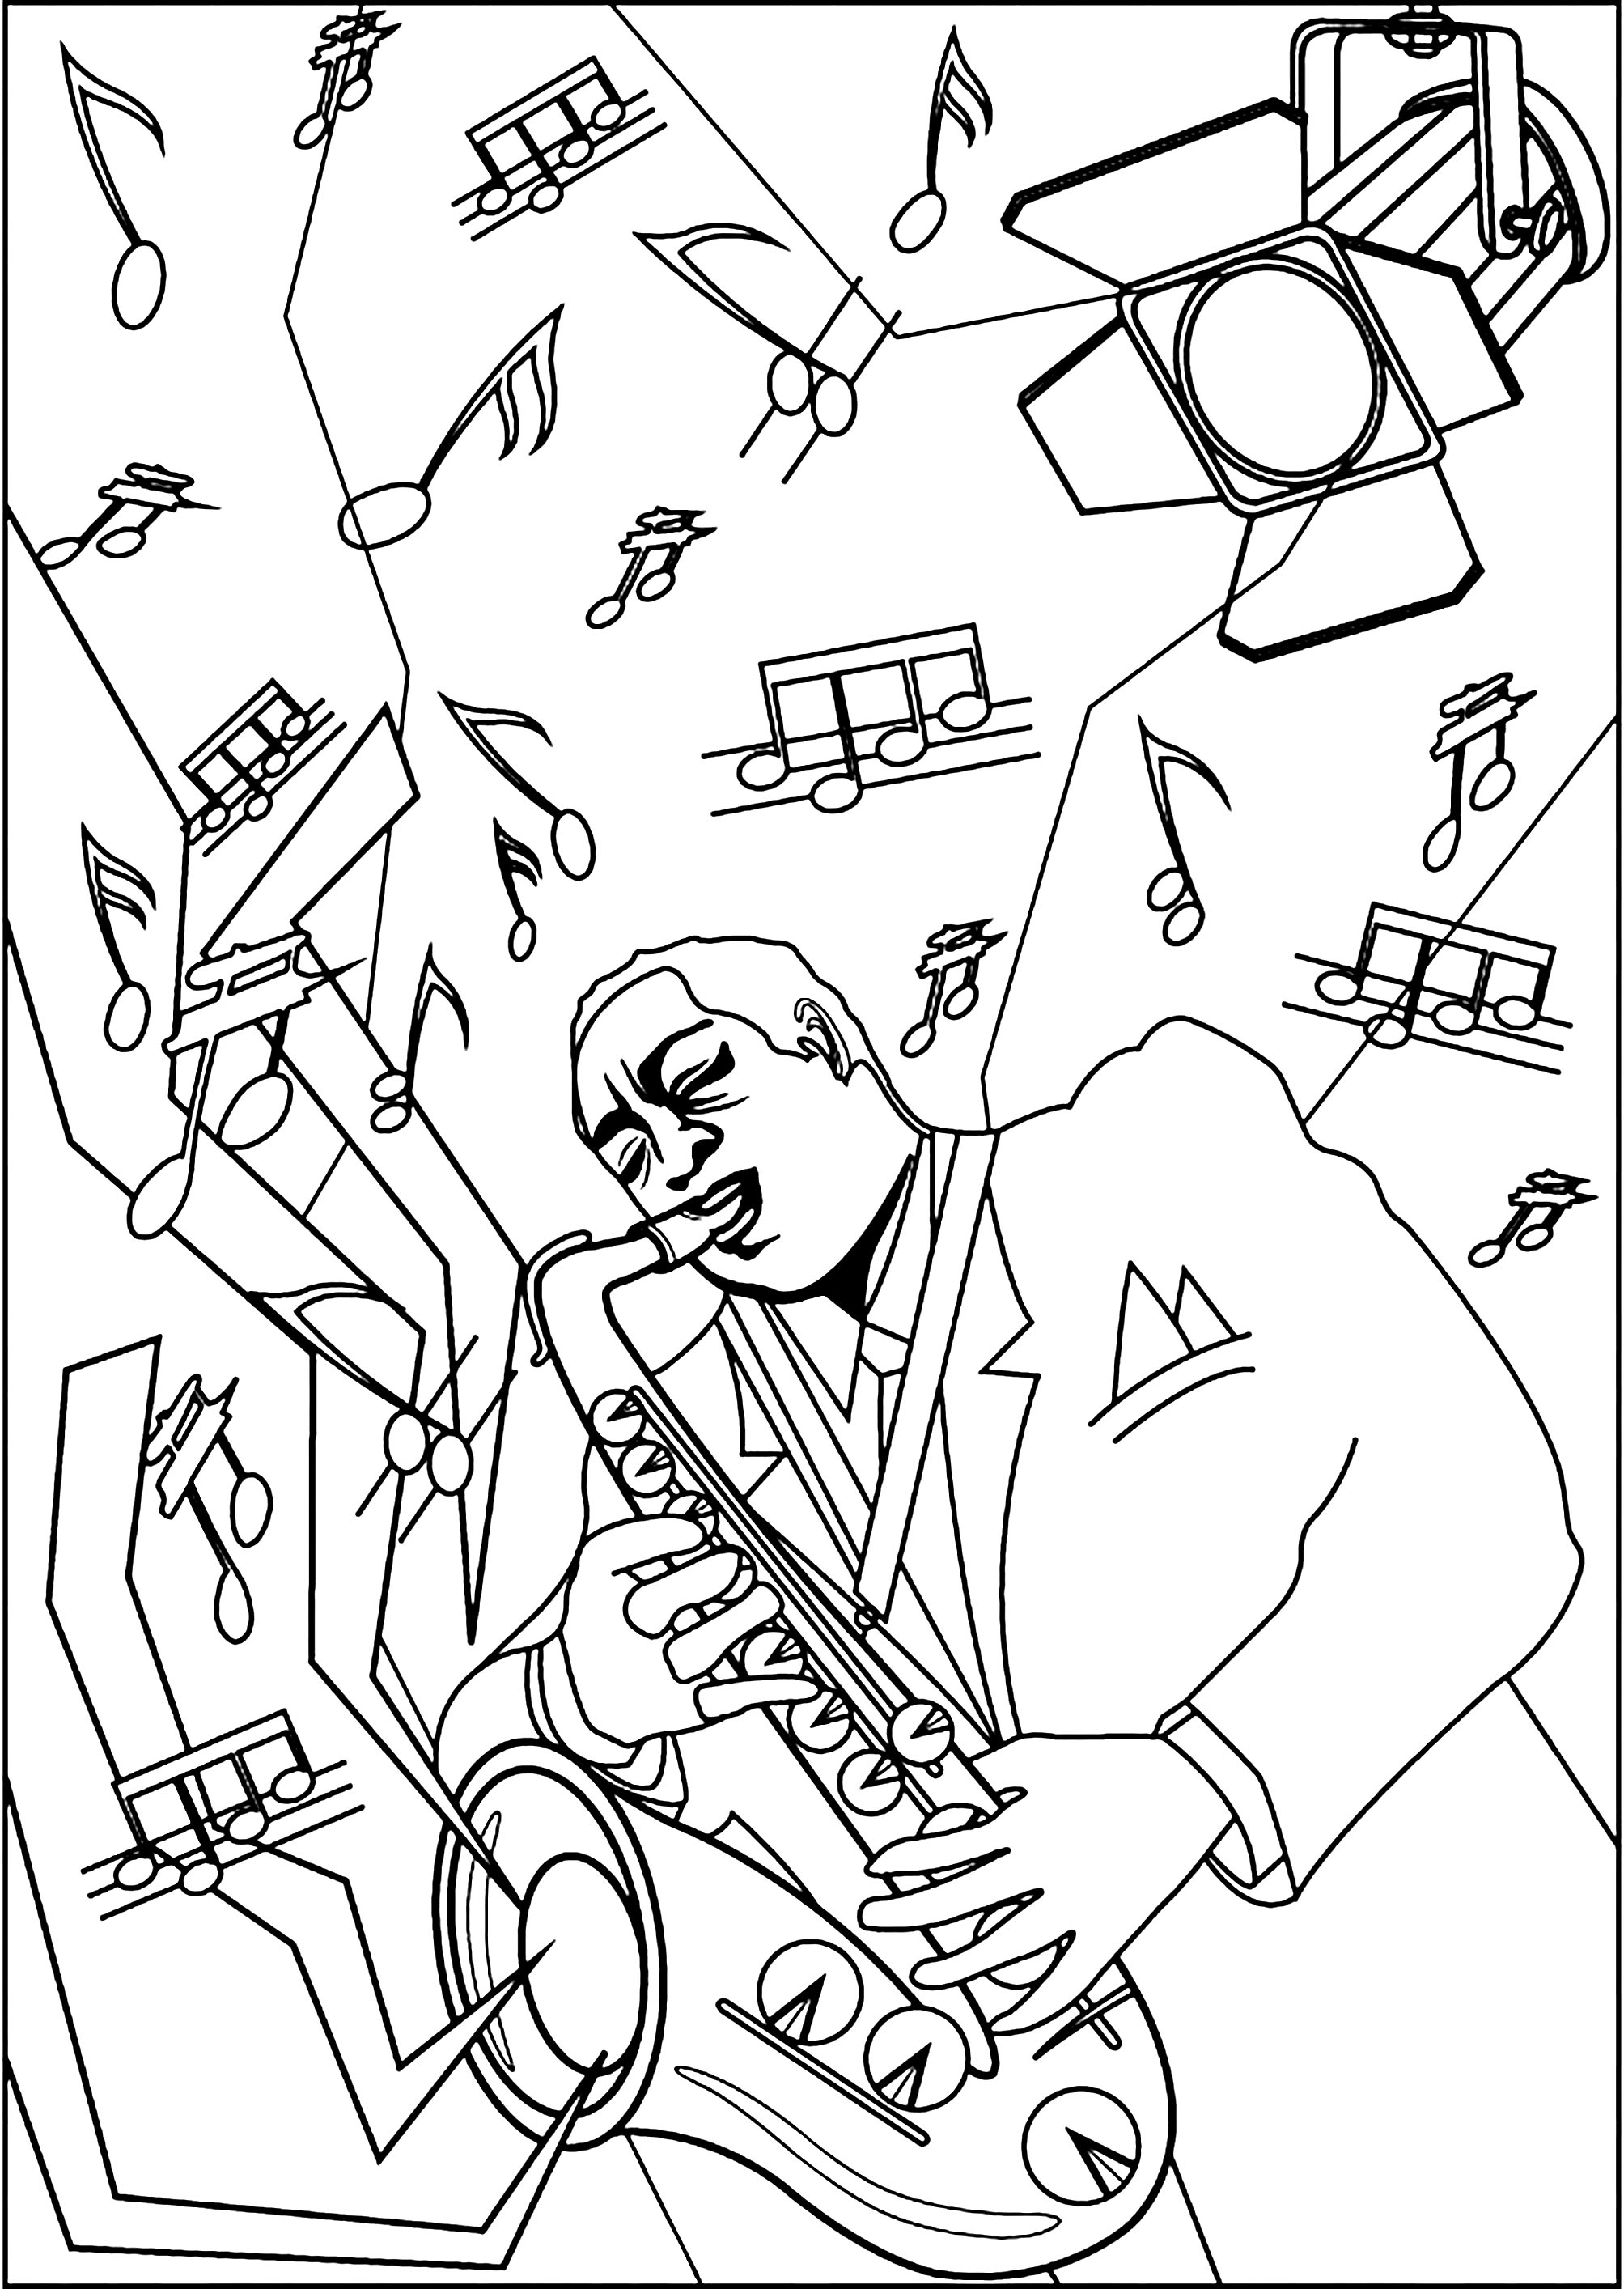 Saxophone - Coloring Pages for Adults